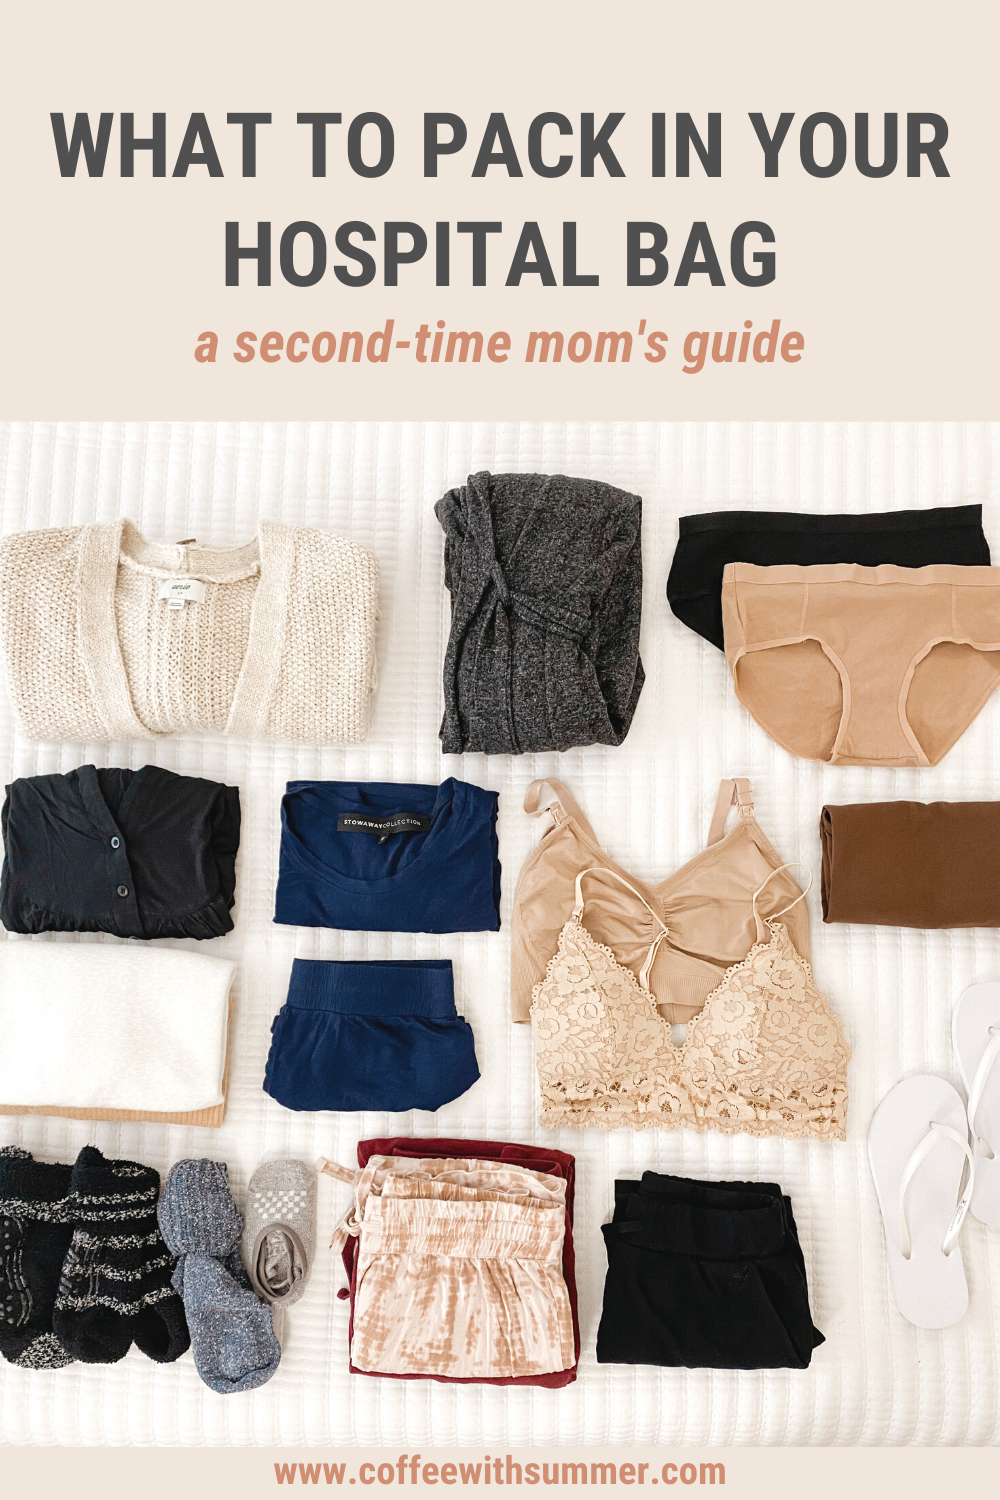 What I'm Packing In My Hospital Bag